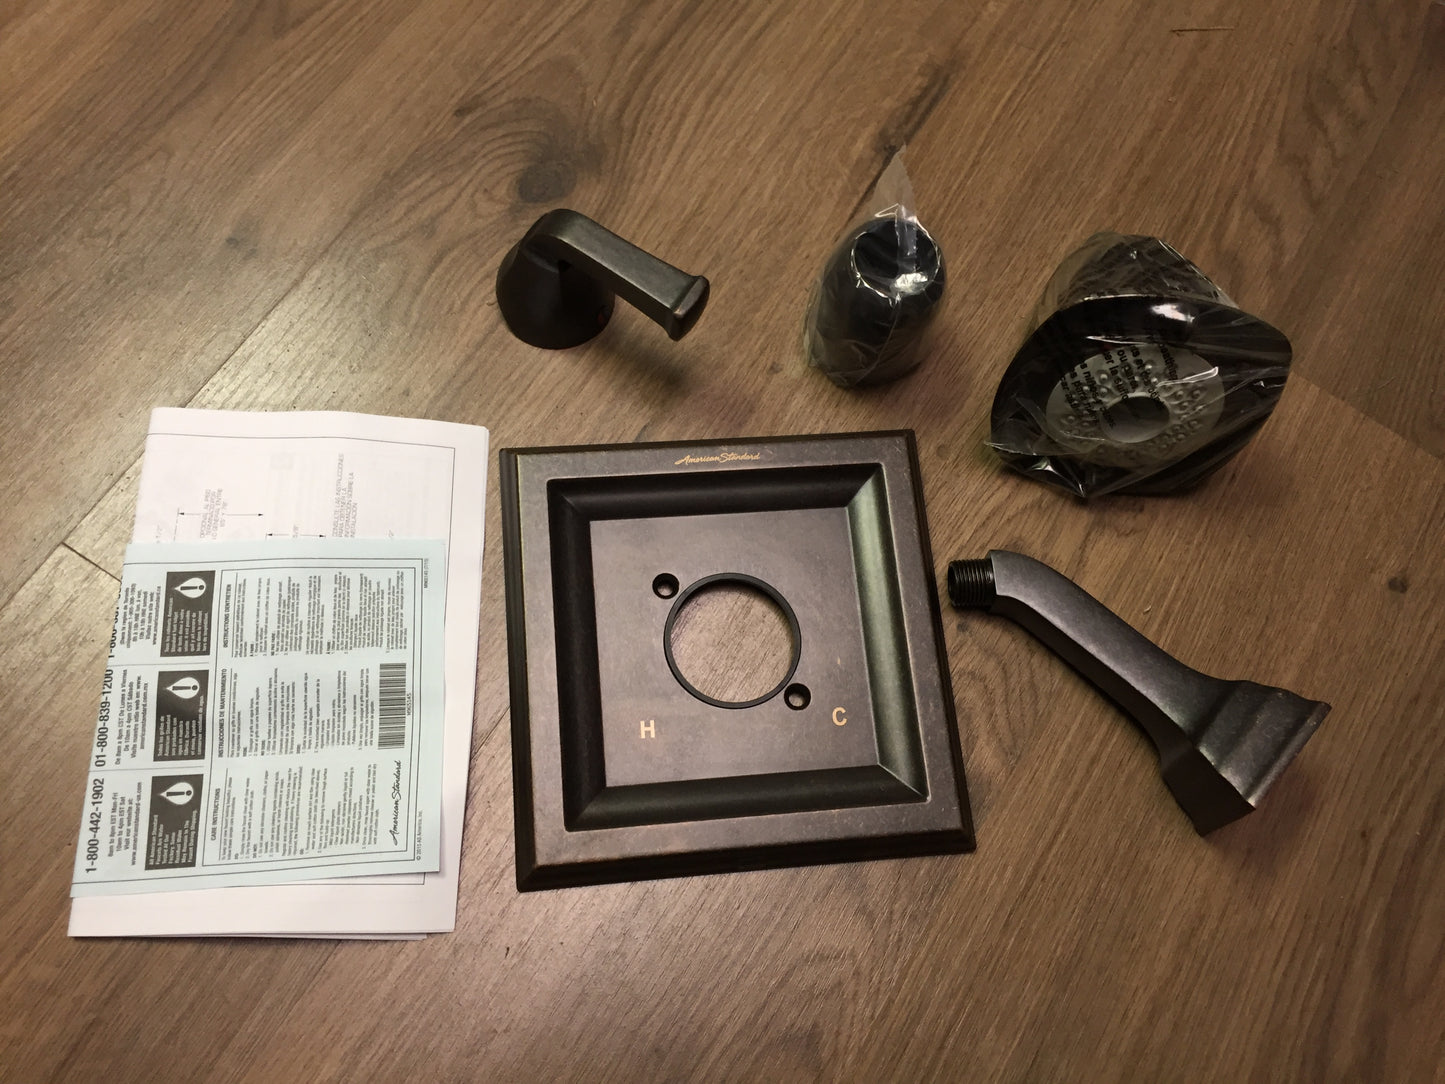 "TOWN SQUARE" PRESSURE BALANCE SHOWER ONLY TRIM KIT WITH 3 FUNCTION FLOWISE SHOWERHEAD, OIL RUBBED BRONZE